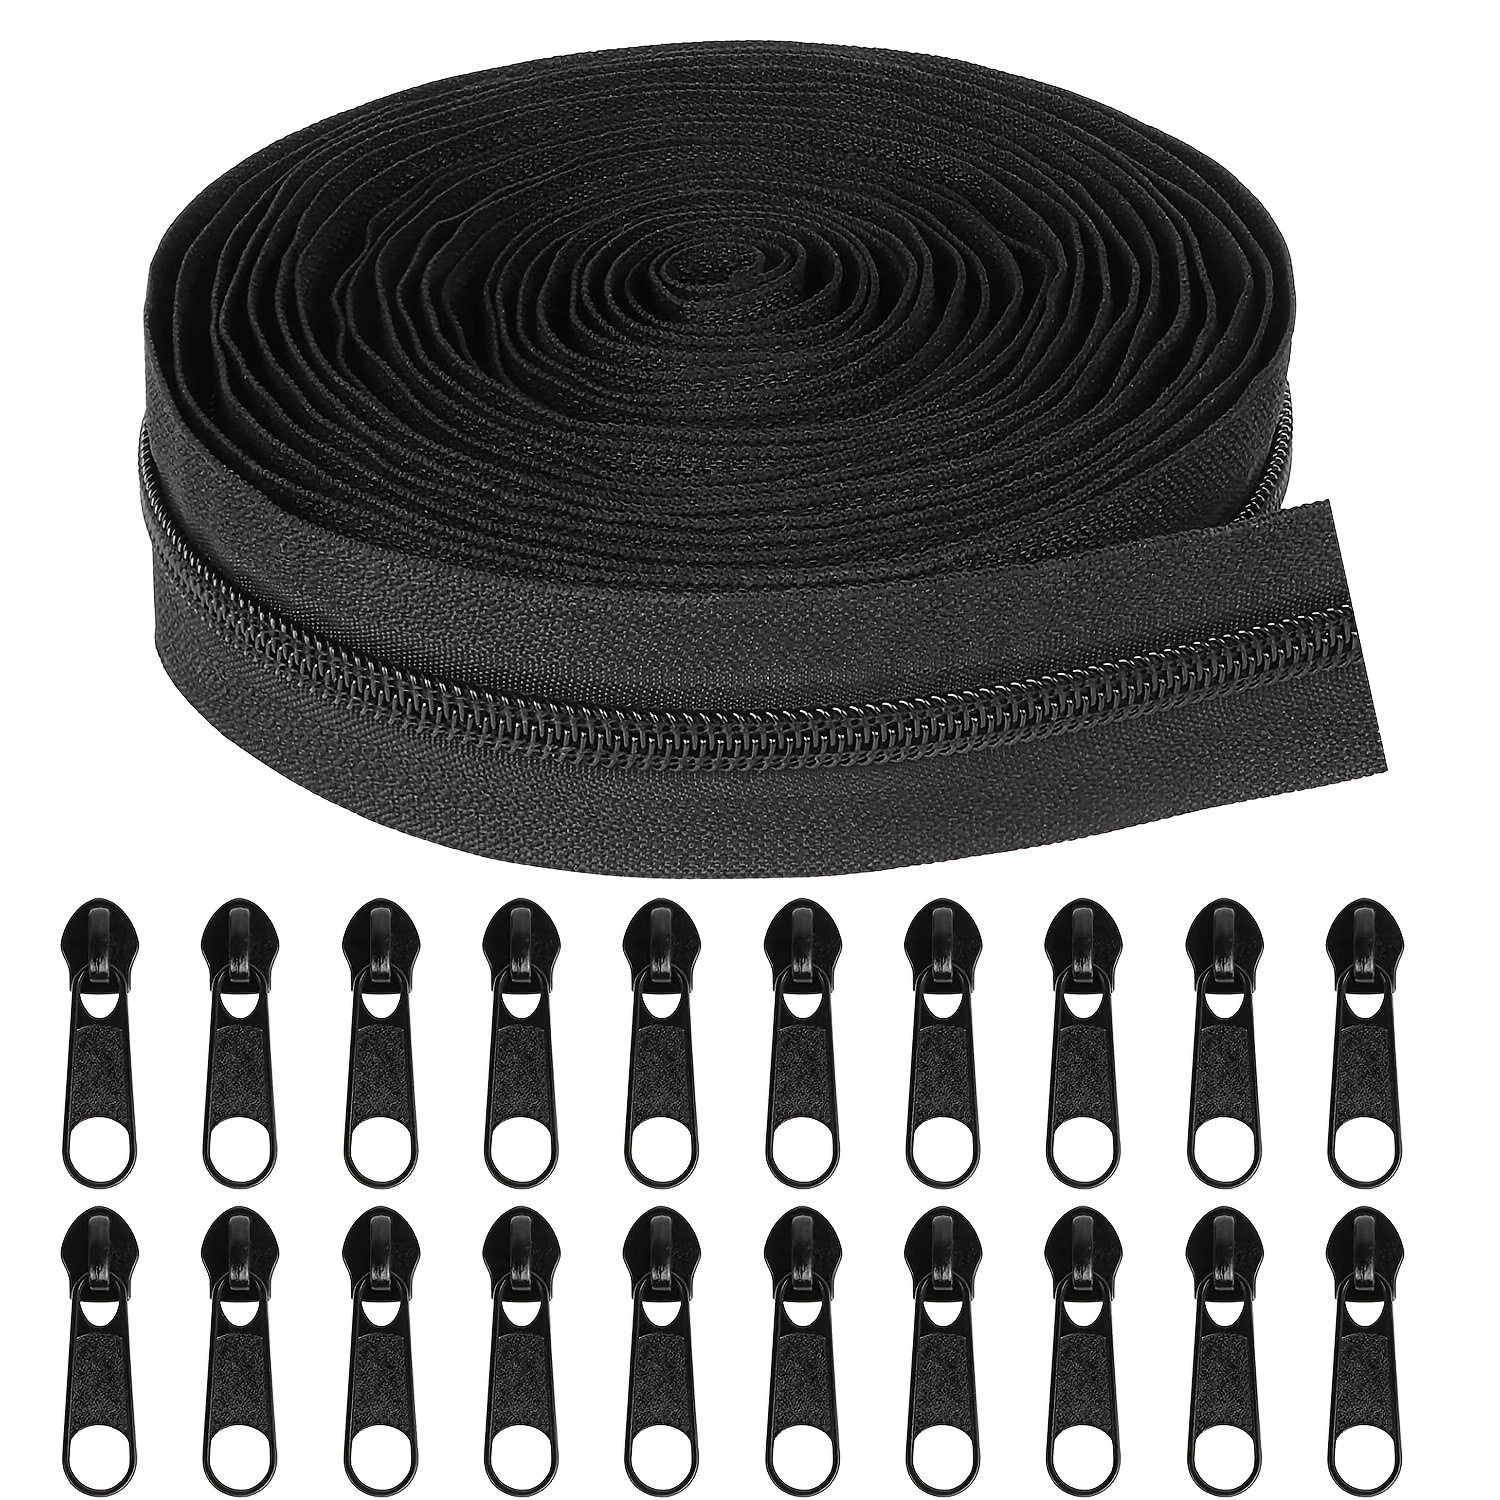 YaHoGa #10 Large Plastic Zipper by The Yard Bulk 5 Yards with 10pcs Long Sliders for DIY Sewing Tailor Crafts Bags Tents Clothing (5 Yards)